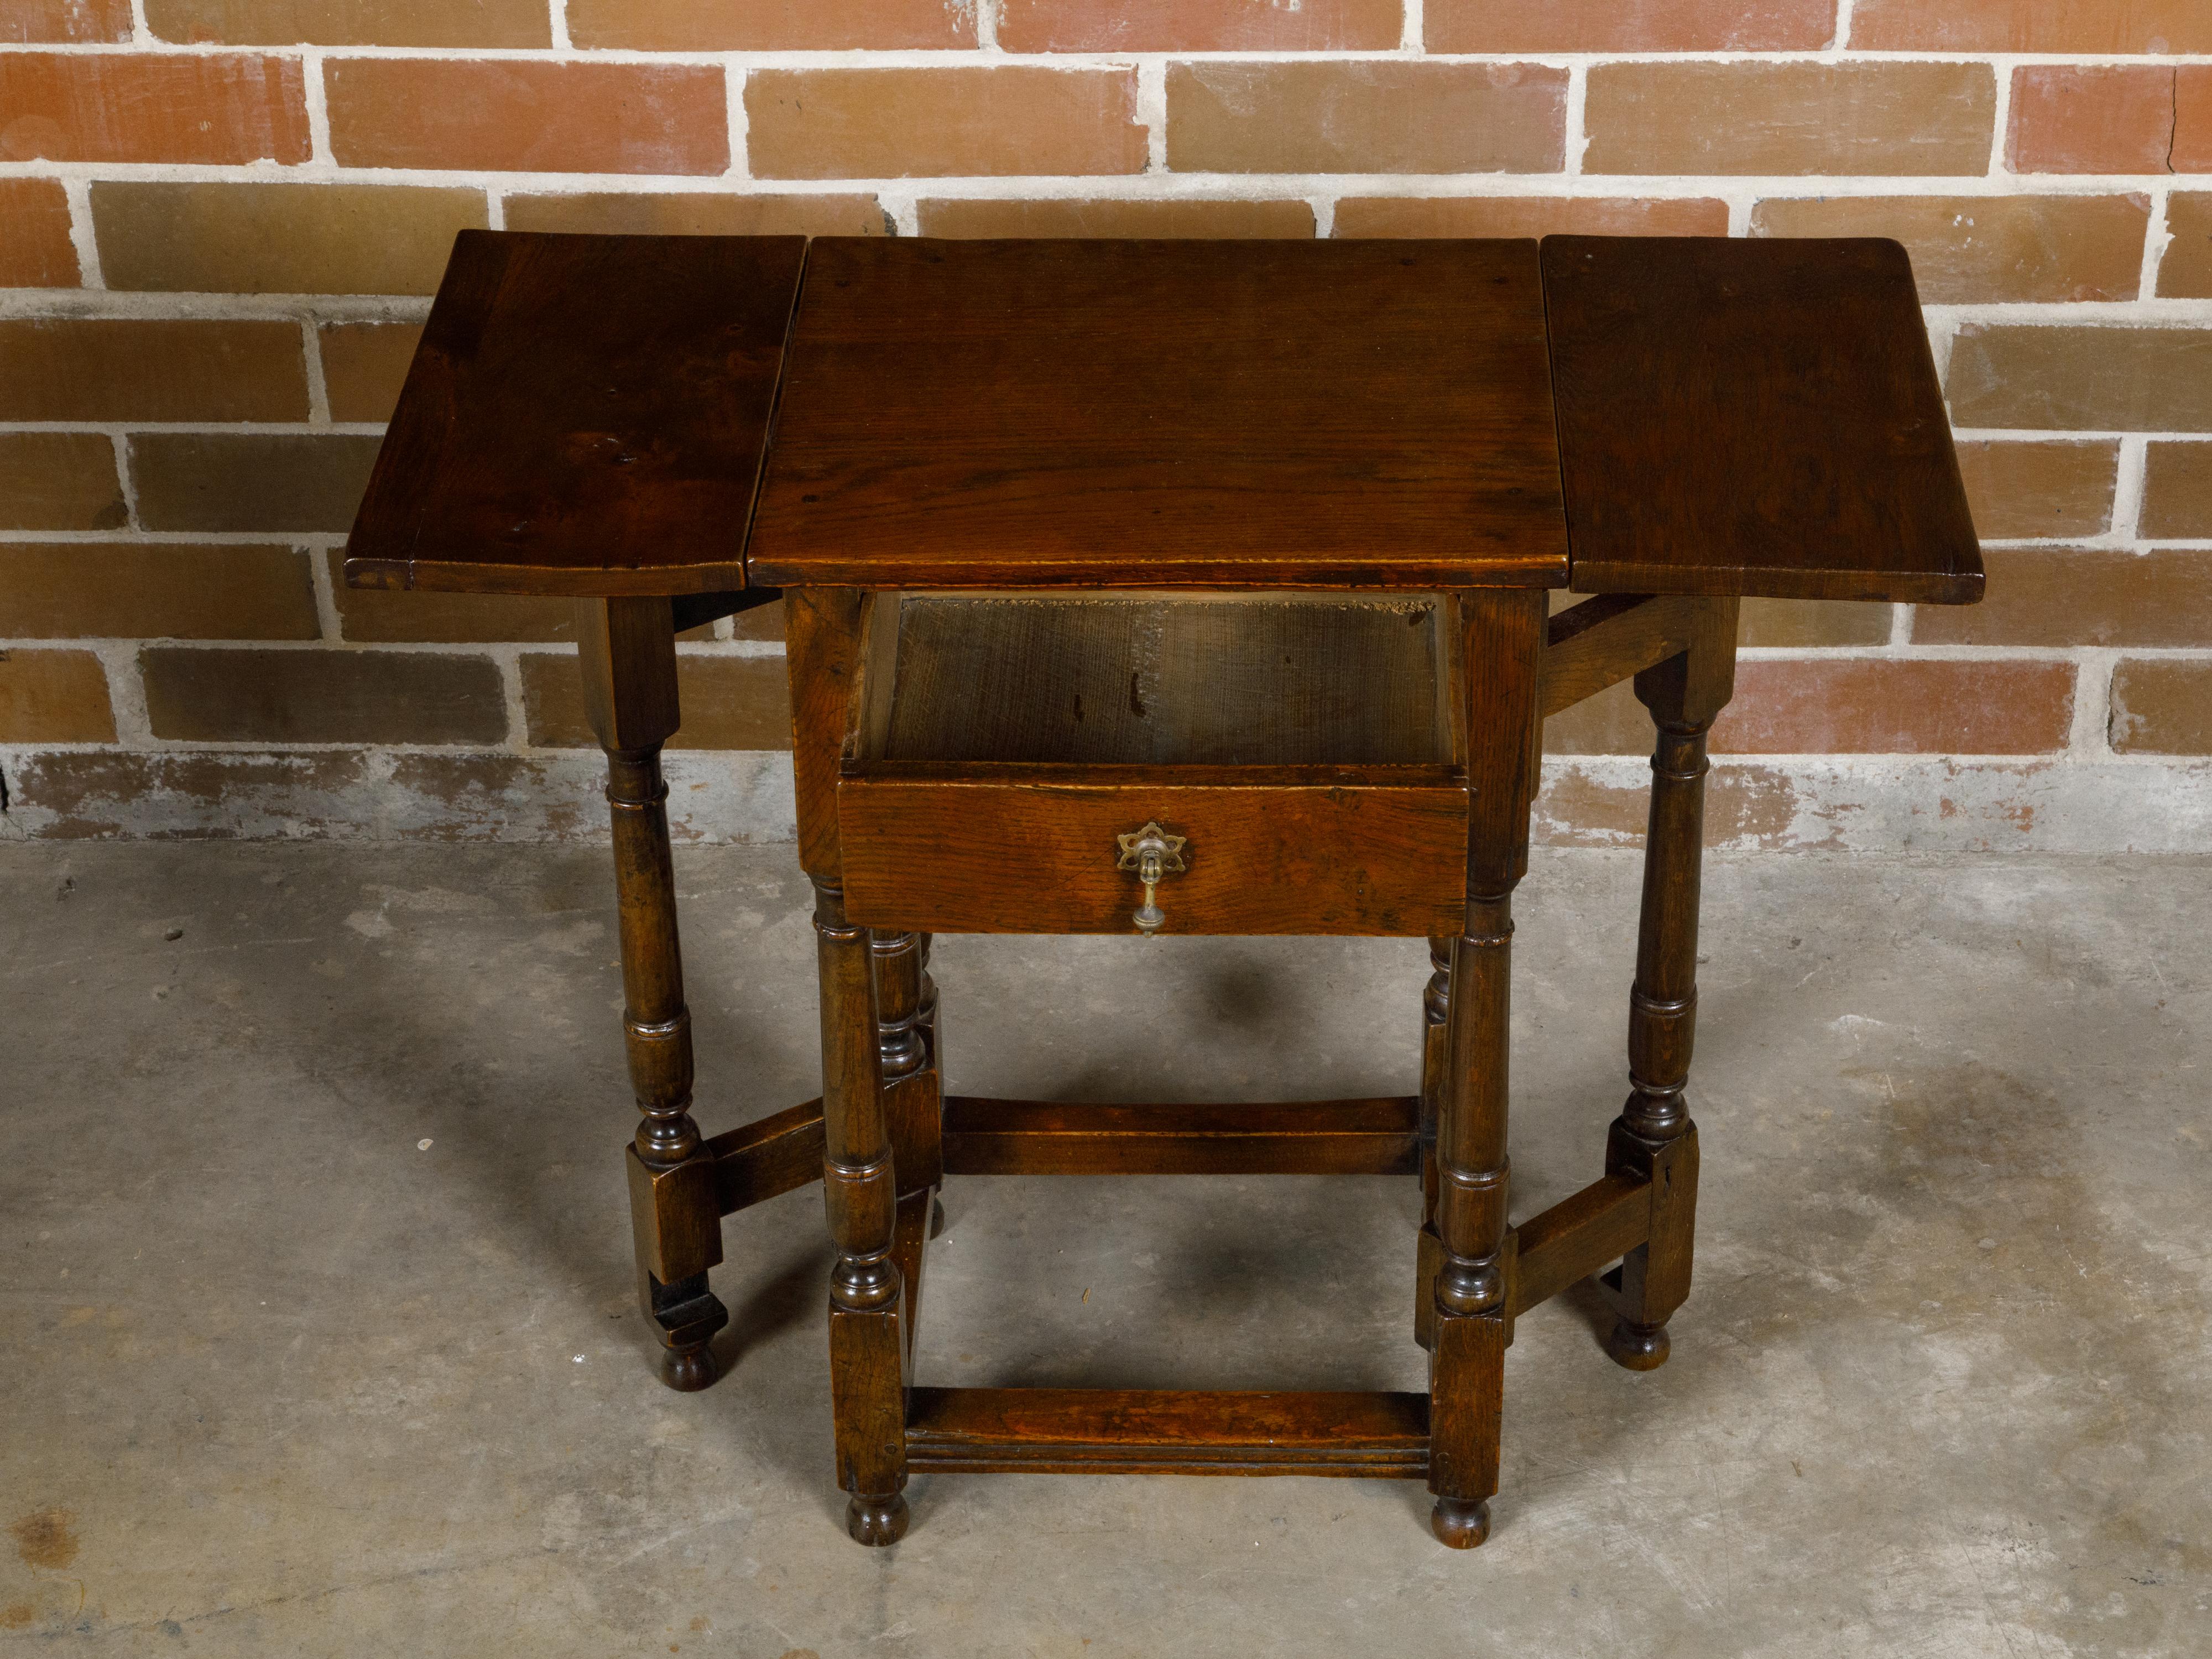 English 19th Century Oak Drop Leaf Table with Swivel Legs and Single Drawer For Sale 6